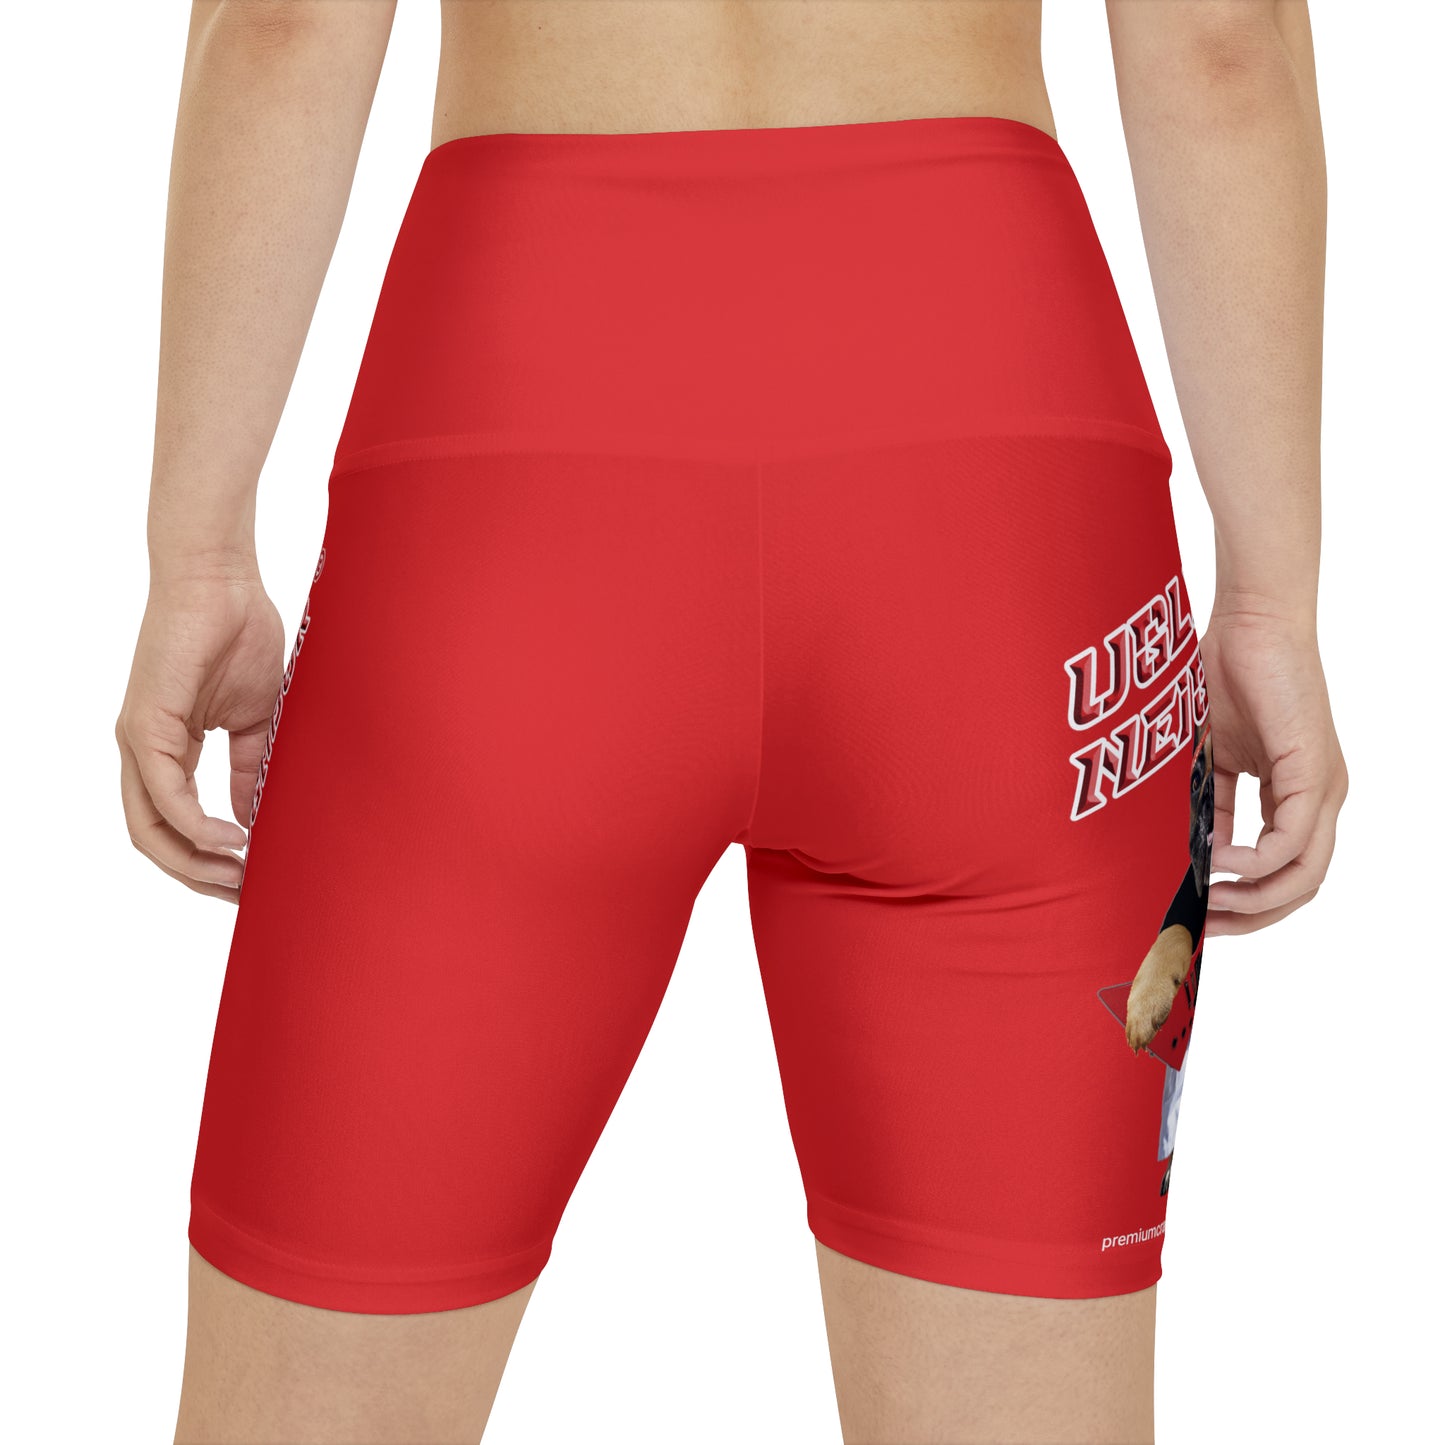 Ugly Neighbor WorkoutWit Shorts - Red